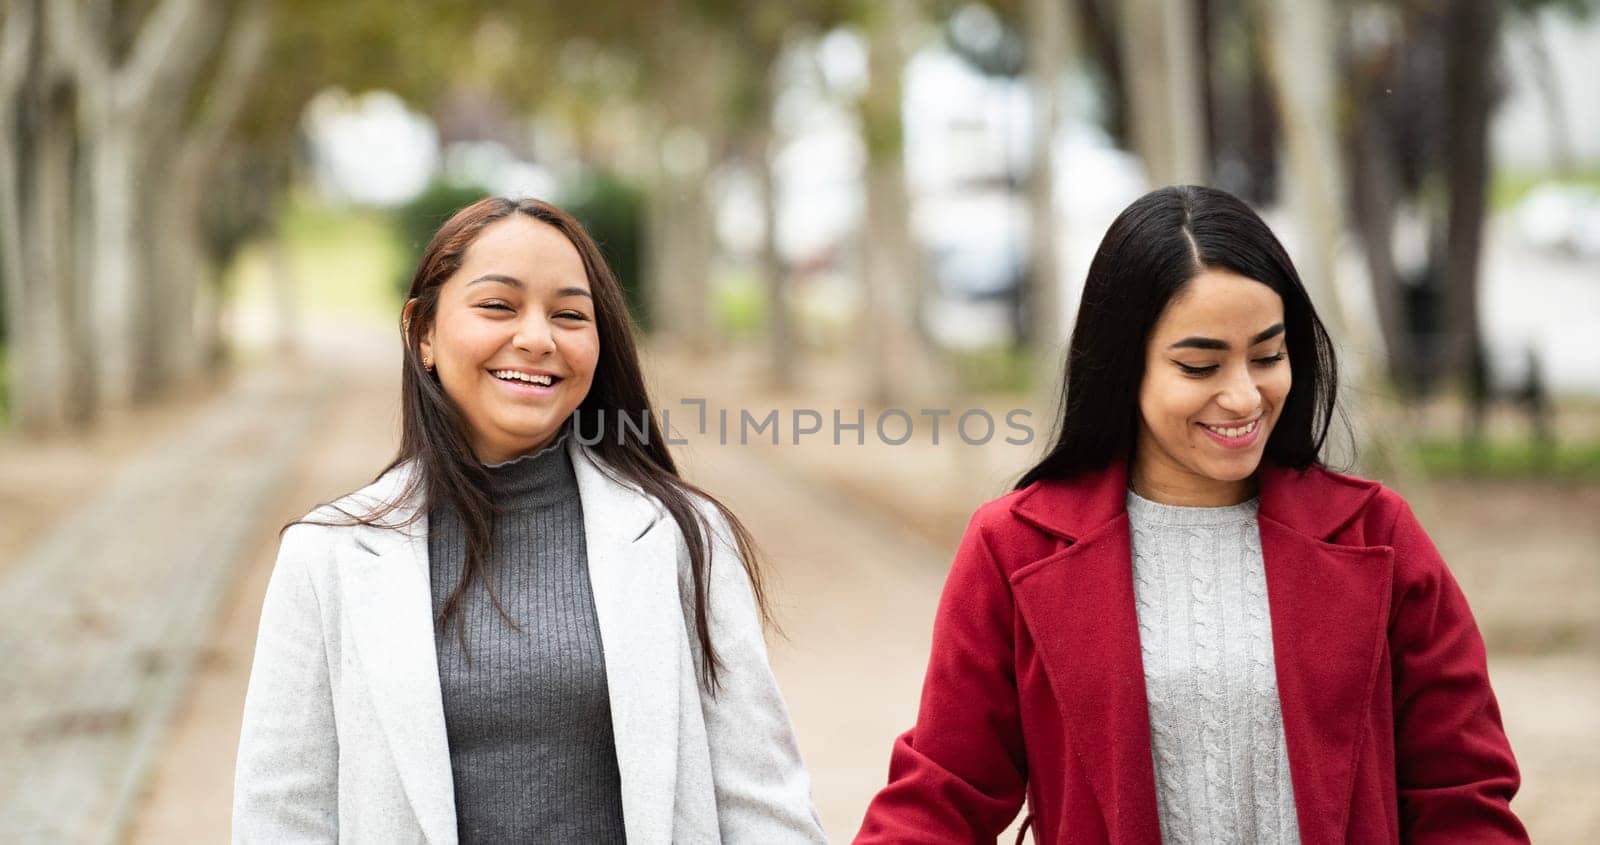 Two women are walking down a path, smiling and laughing. They are wearing coats and seem to be enjoying their time togethe by papatonic